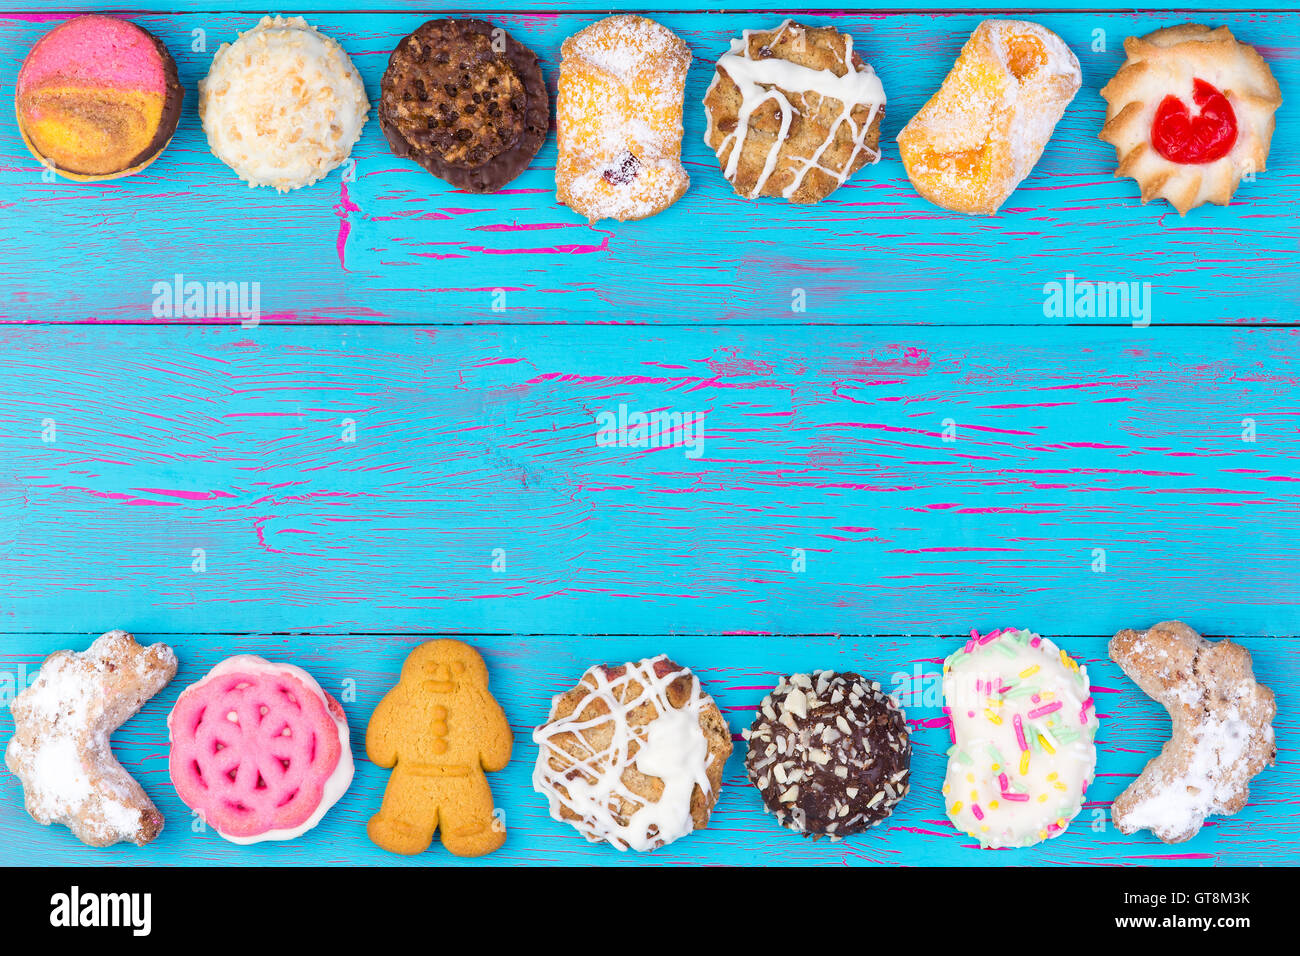 Double border of colorful cookies or biscuits arranged in a line on a turquoise blue crackle paint wooden background, overhead v Stock Photo